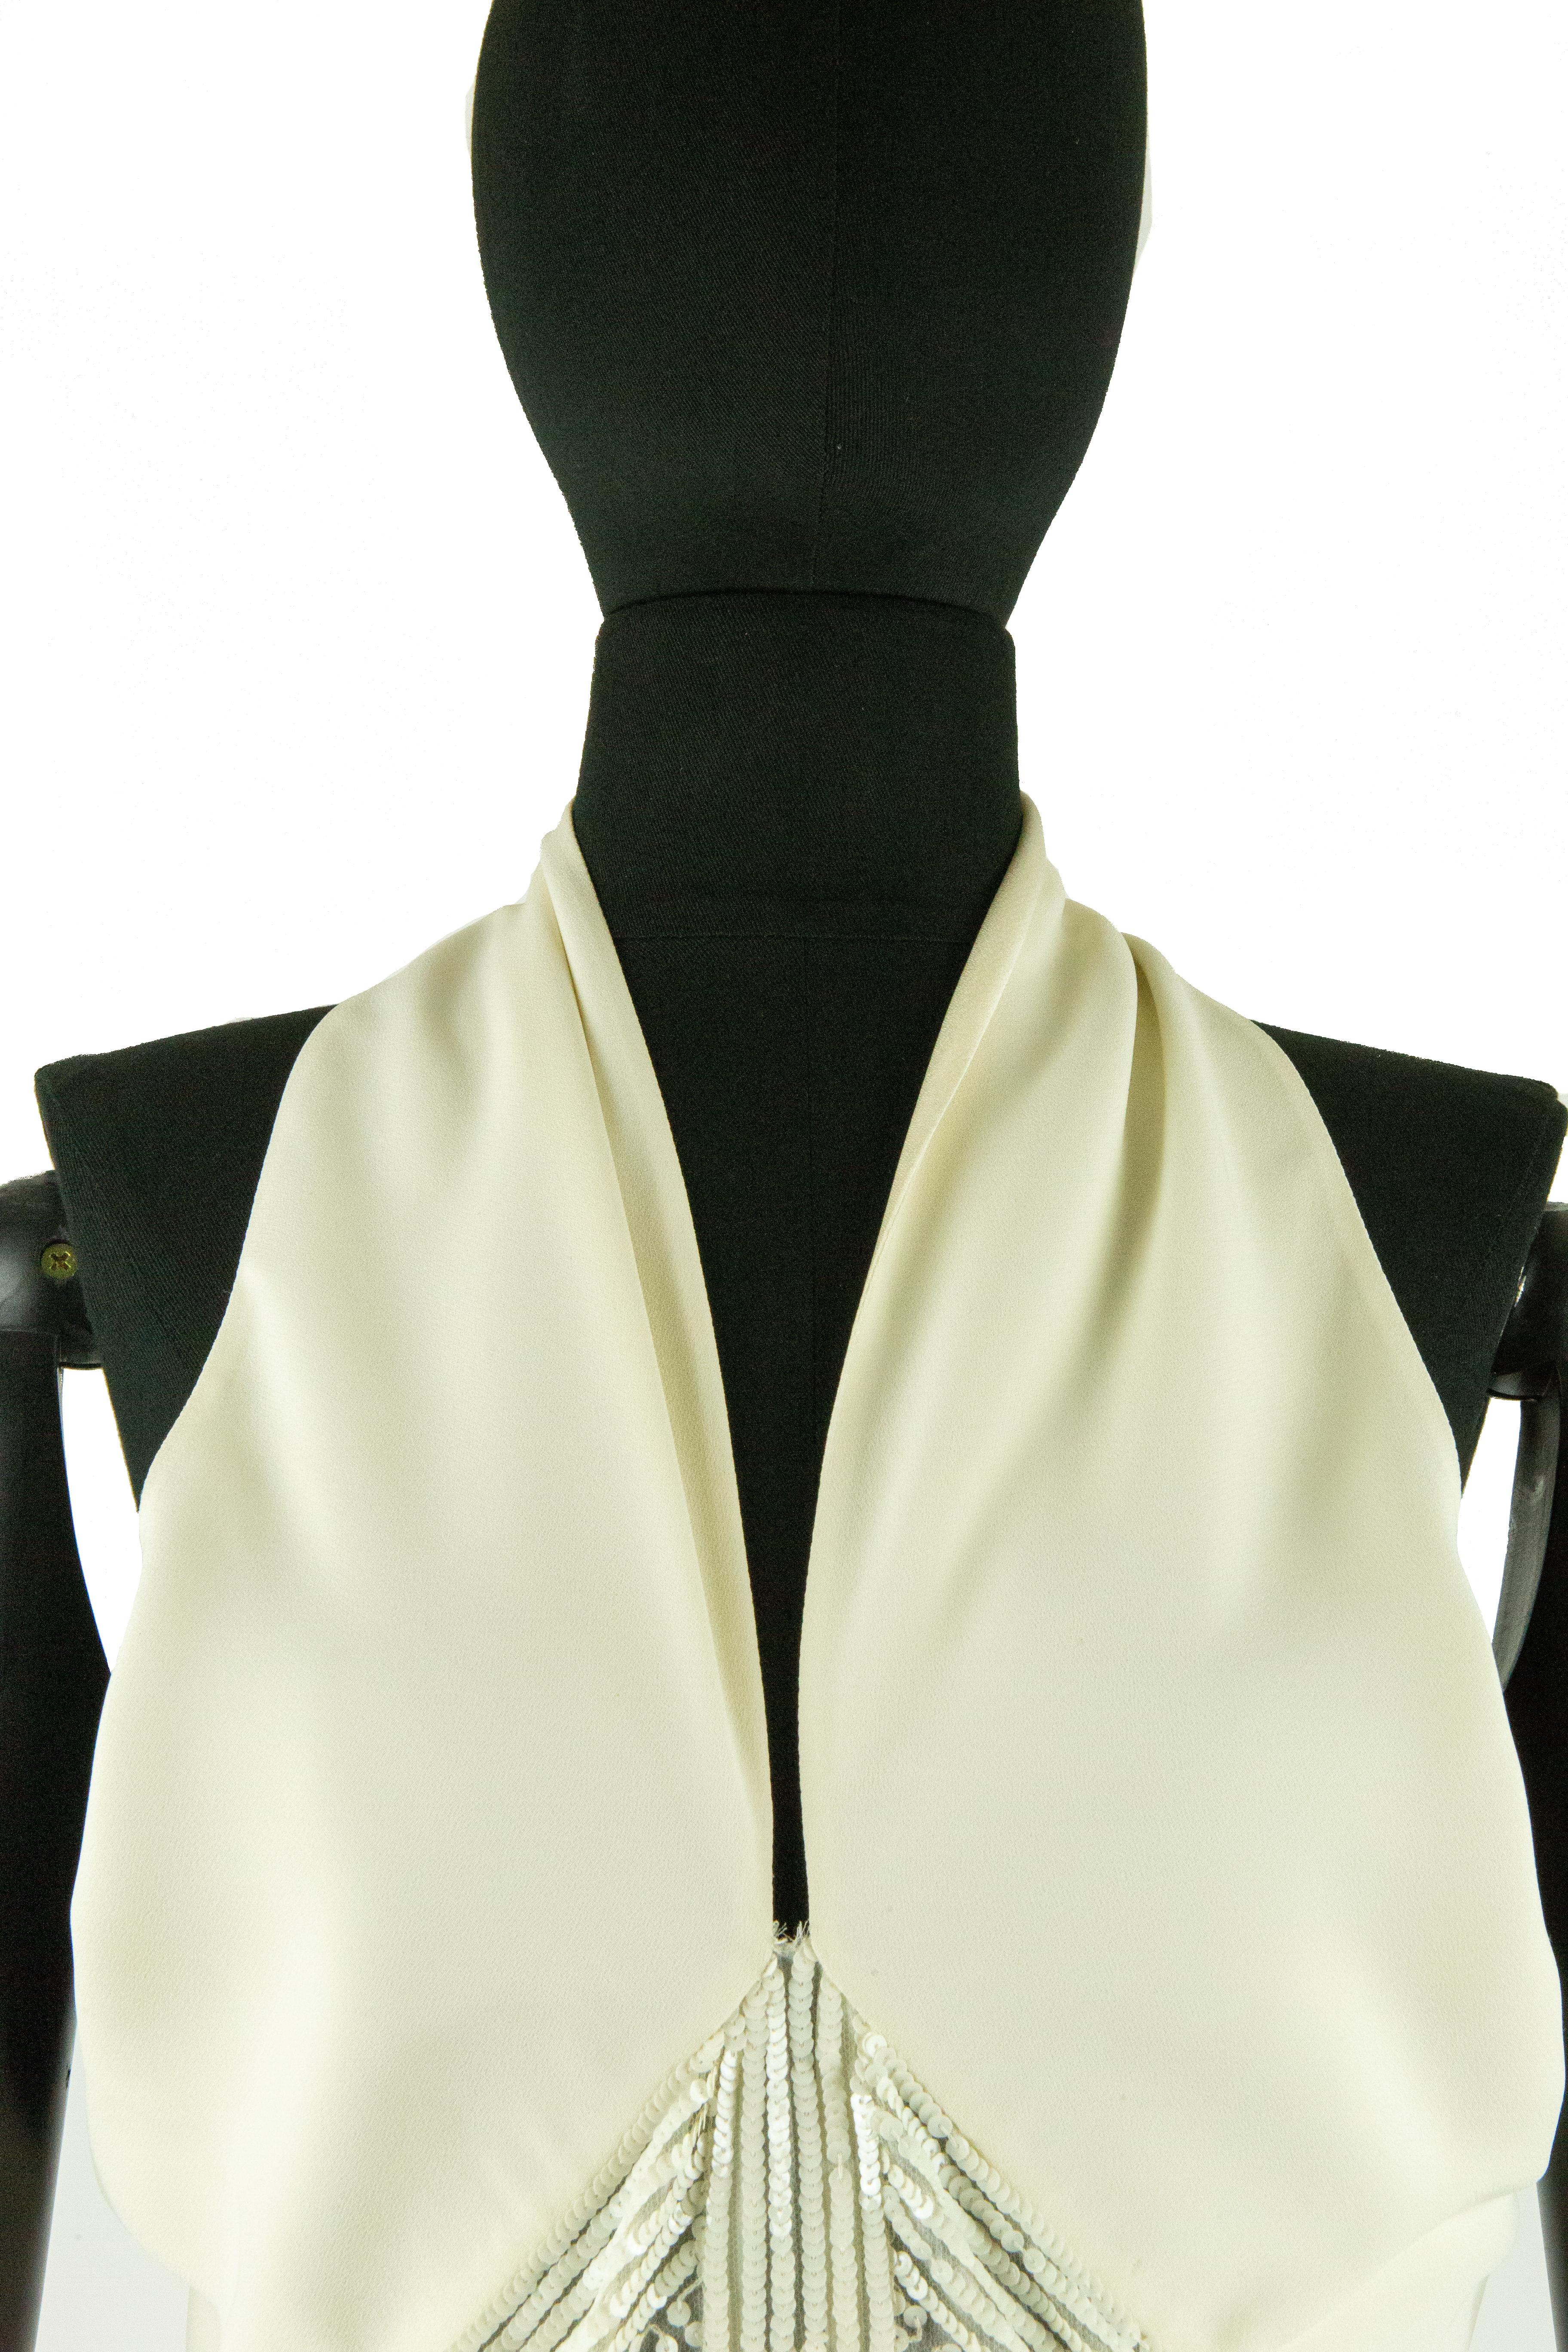 A Valentino ivory crepe de chine cocktail dress with a slouched halter-neck and plunging neckline. The bodice also features an open back and buttons on the back of the neck. The skirt has a pointed empire line below the bust which becomes a straight